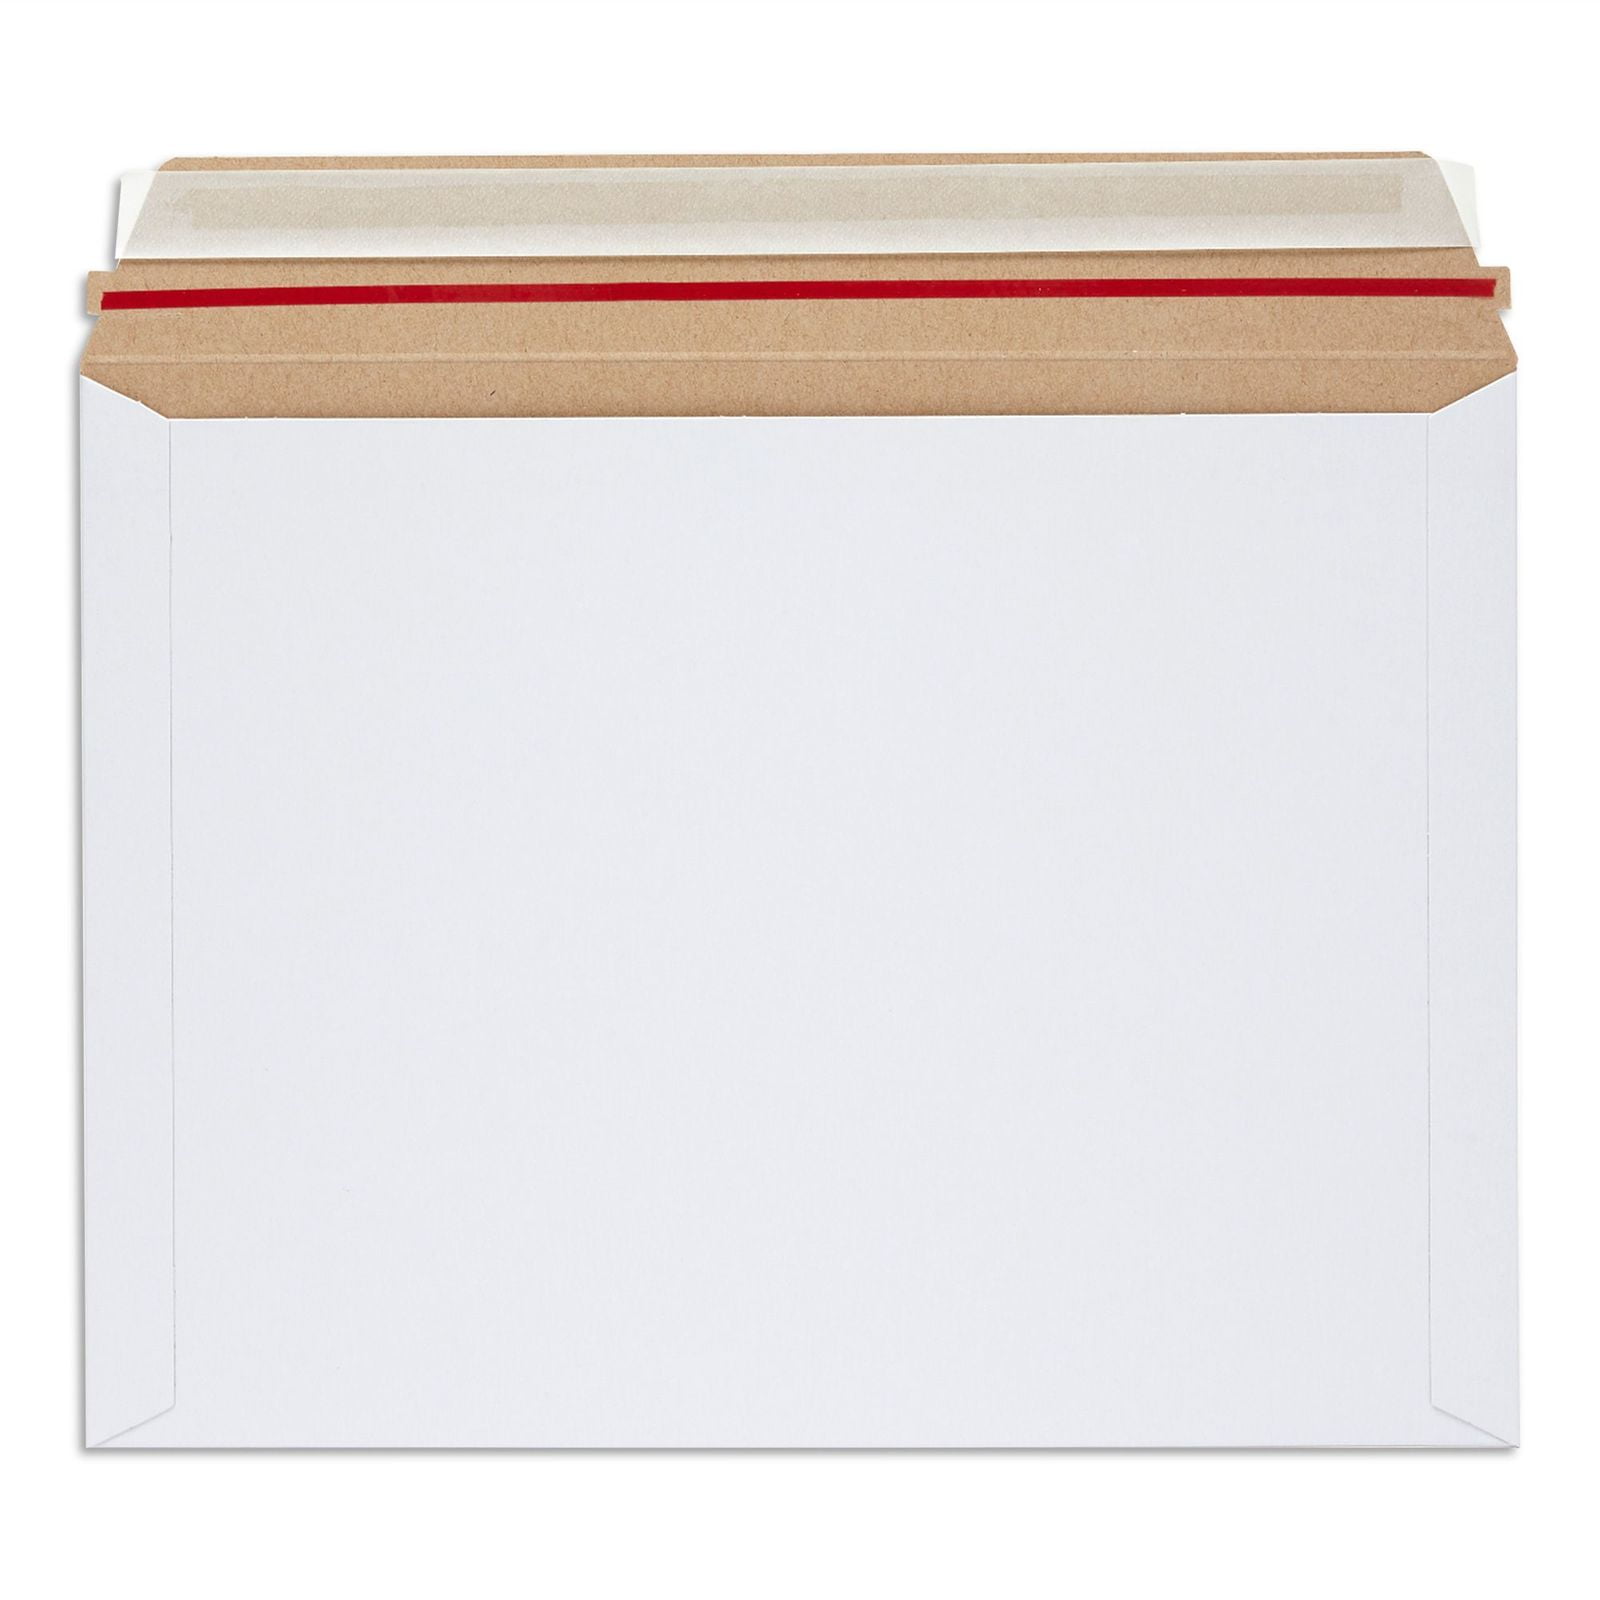 STRONG POLY MAILING  BAGS 10 X 14 LARGE LETTER SIZE PACKS OF 5,10,20,25 OR 50 